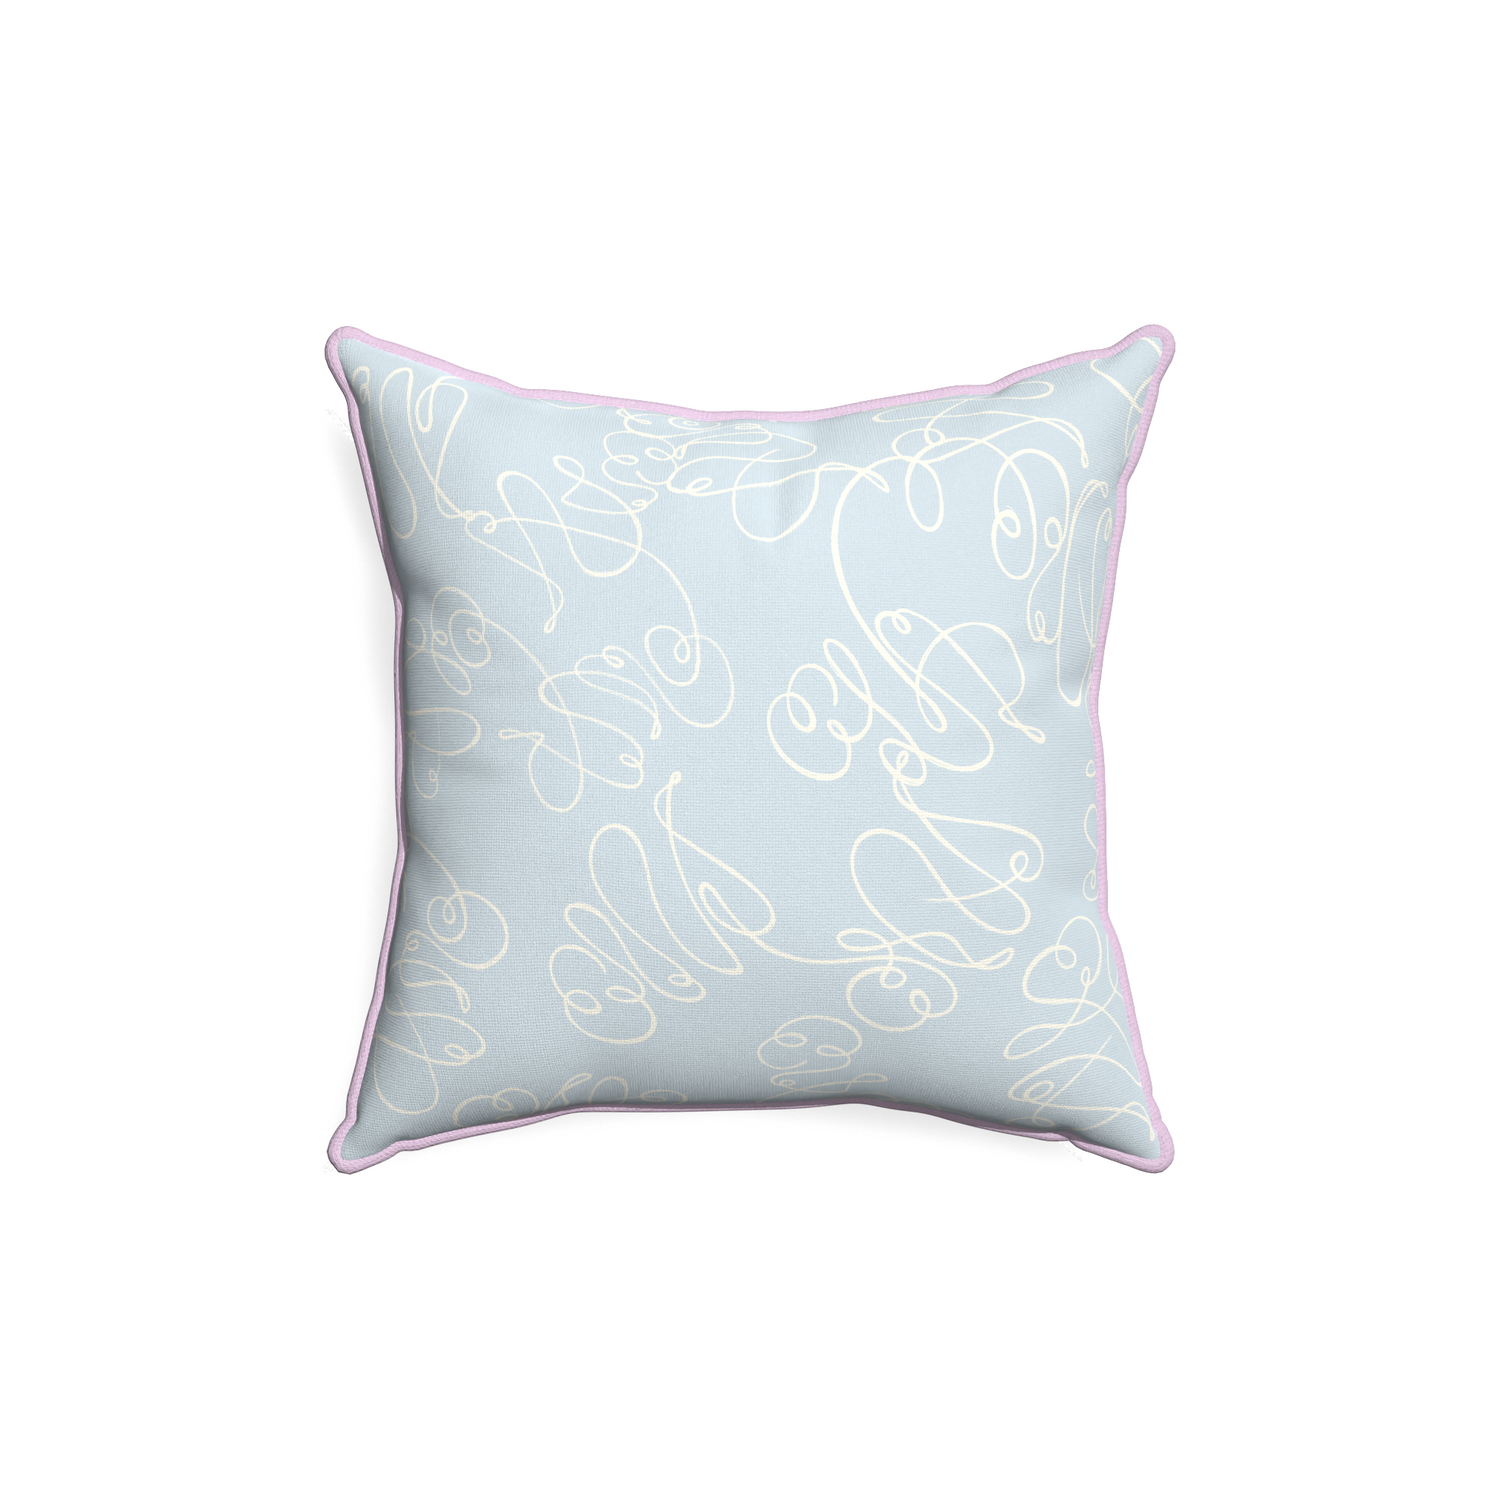 18-square mirabella custom powder blue abstractpillow with l piping on white background